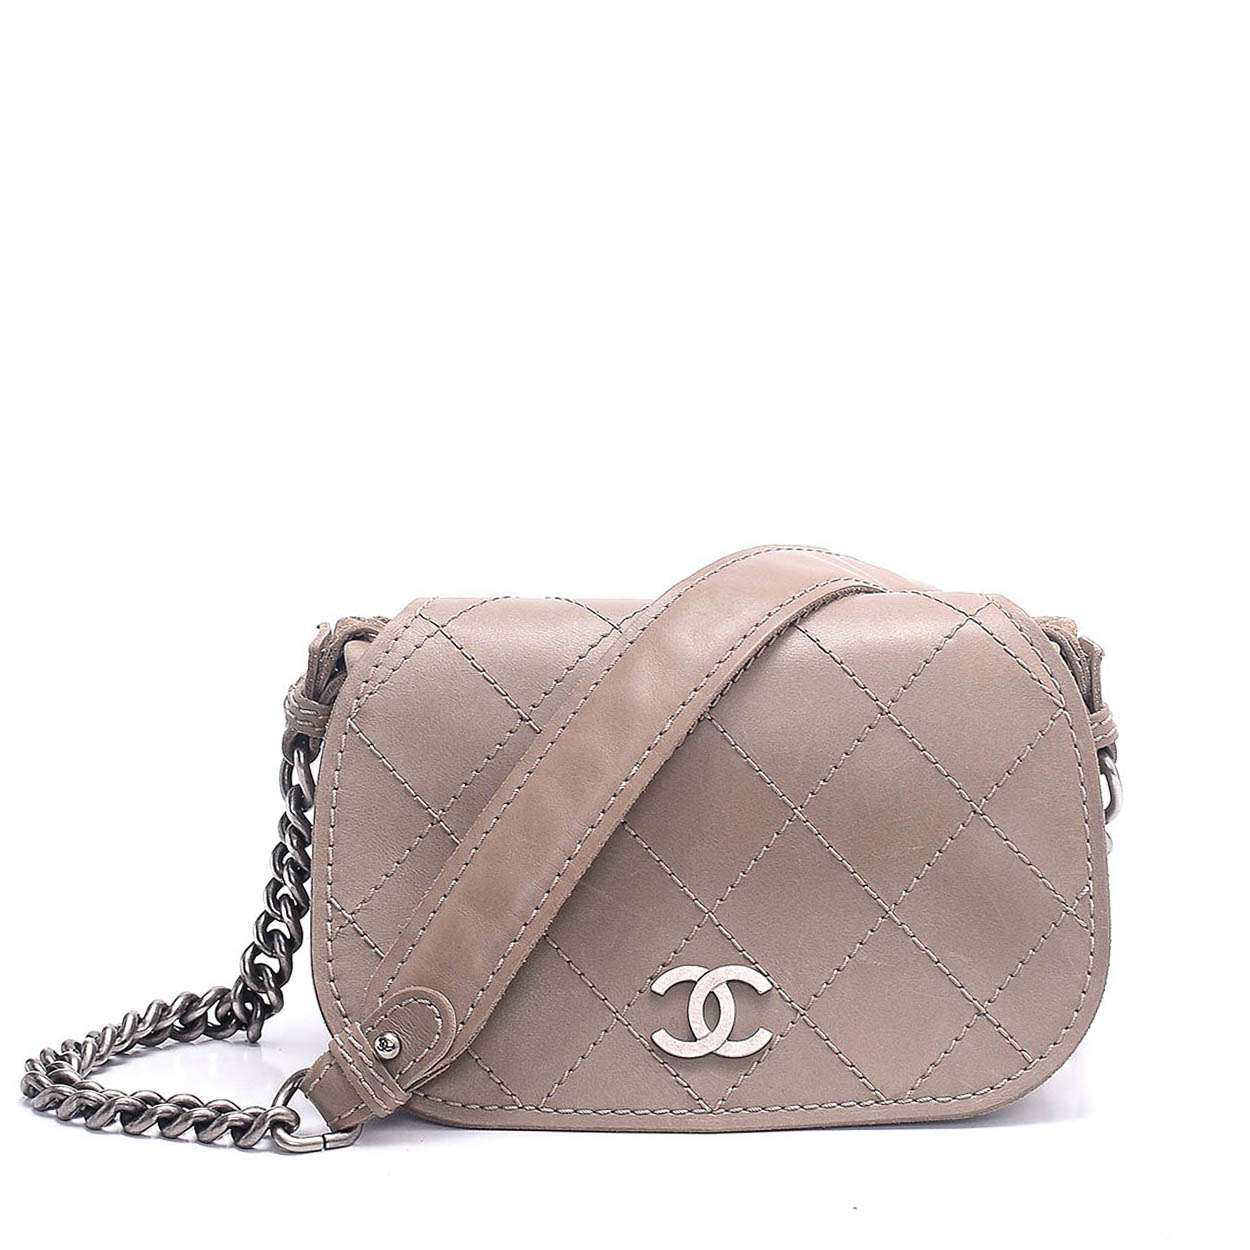 Chanel - Grey Quilted Lambskin Leather Mini Flap Bag